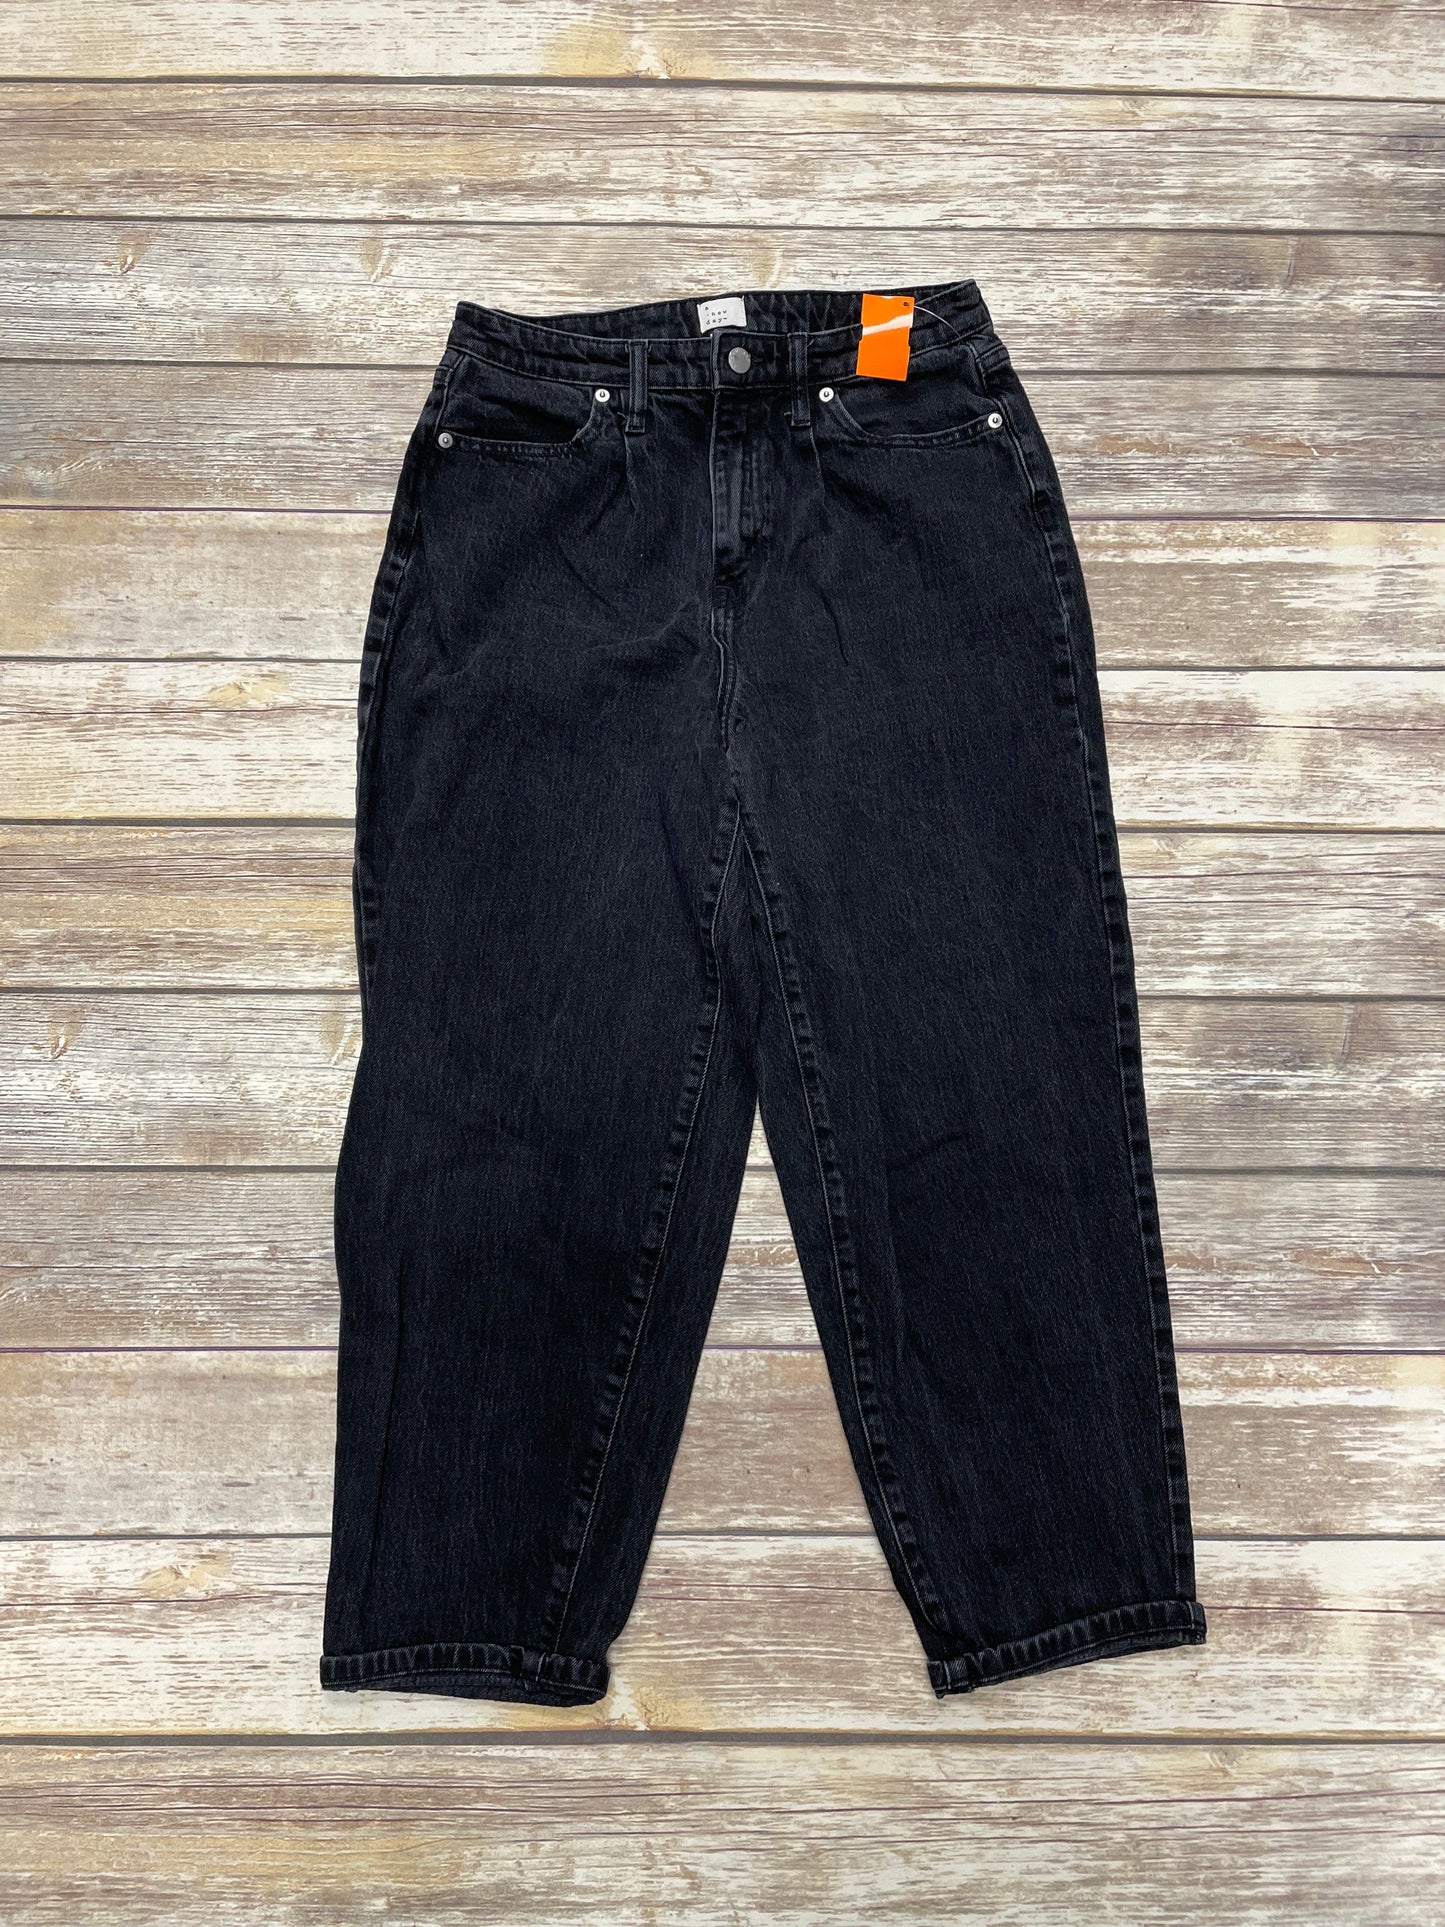 Jeans Relaxed/boyfriend By A New Day  Size: 10